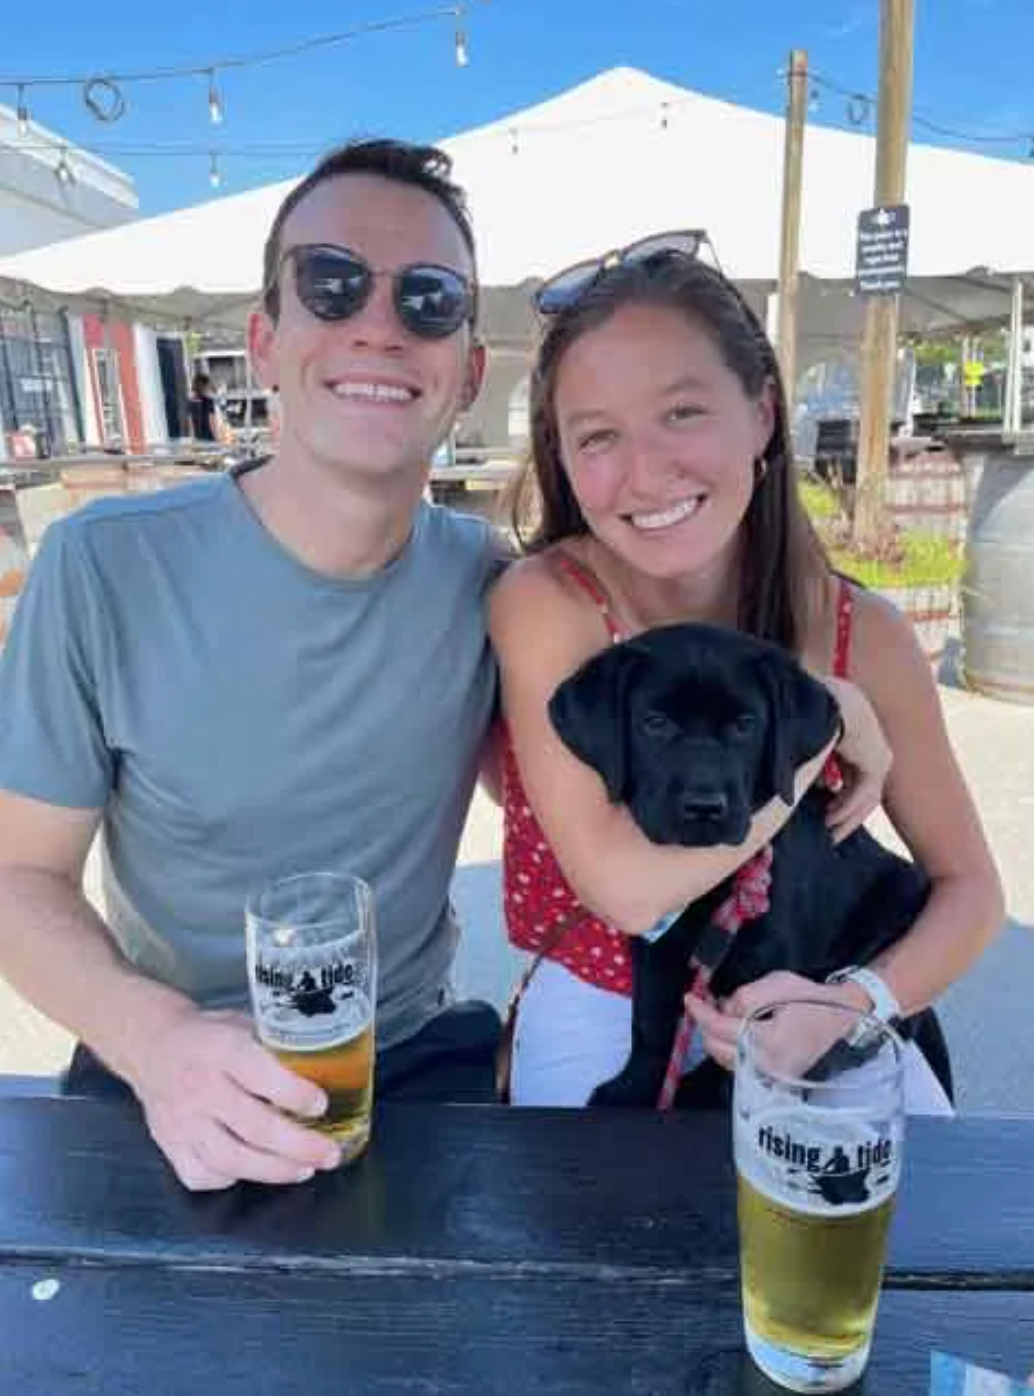 Cameron McMillan, pictured with his fiancé and their puppy, served as a field artillery officer in the Army National Guard for four years. (Courtesy of Cameron McMillan)